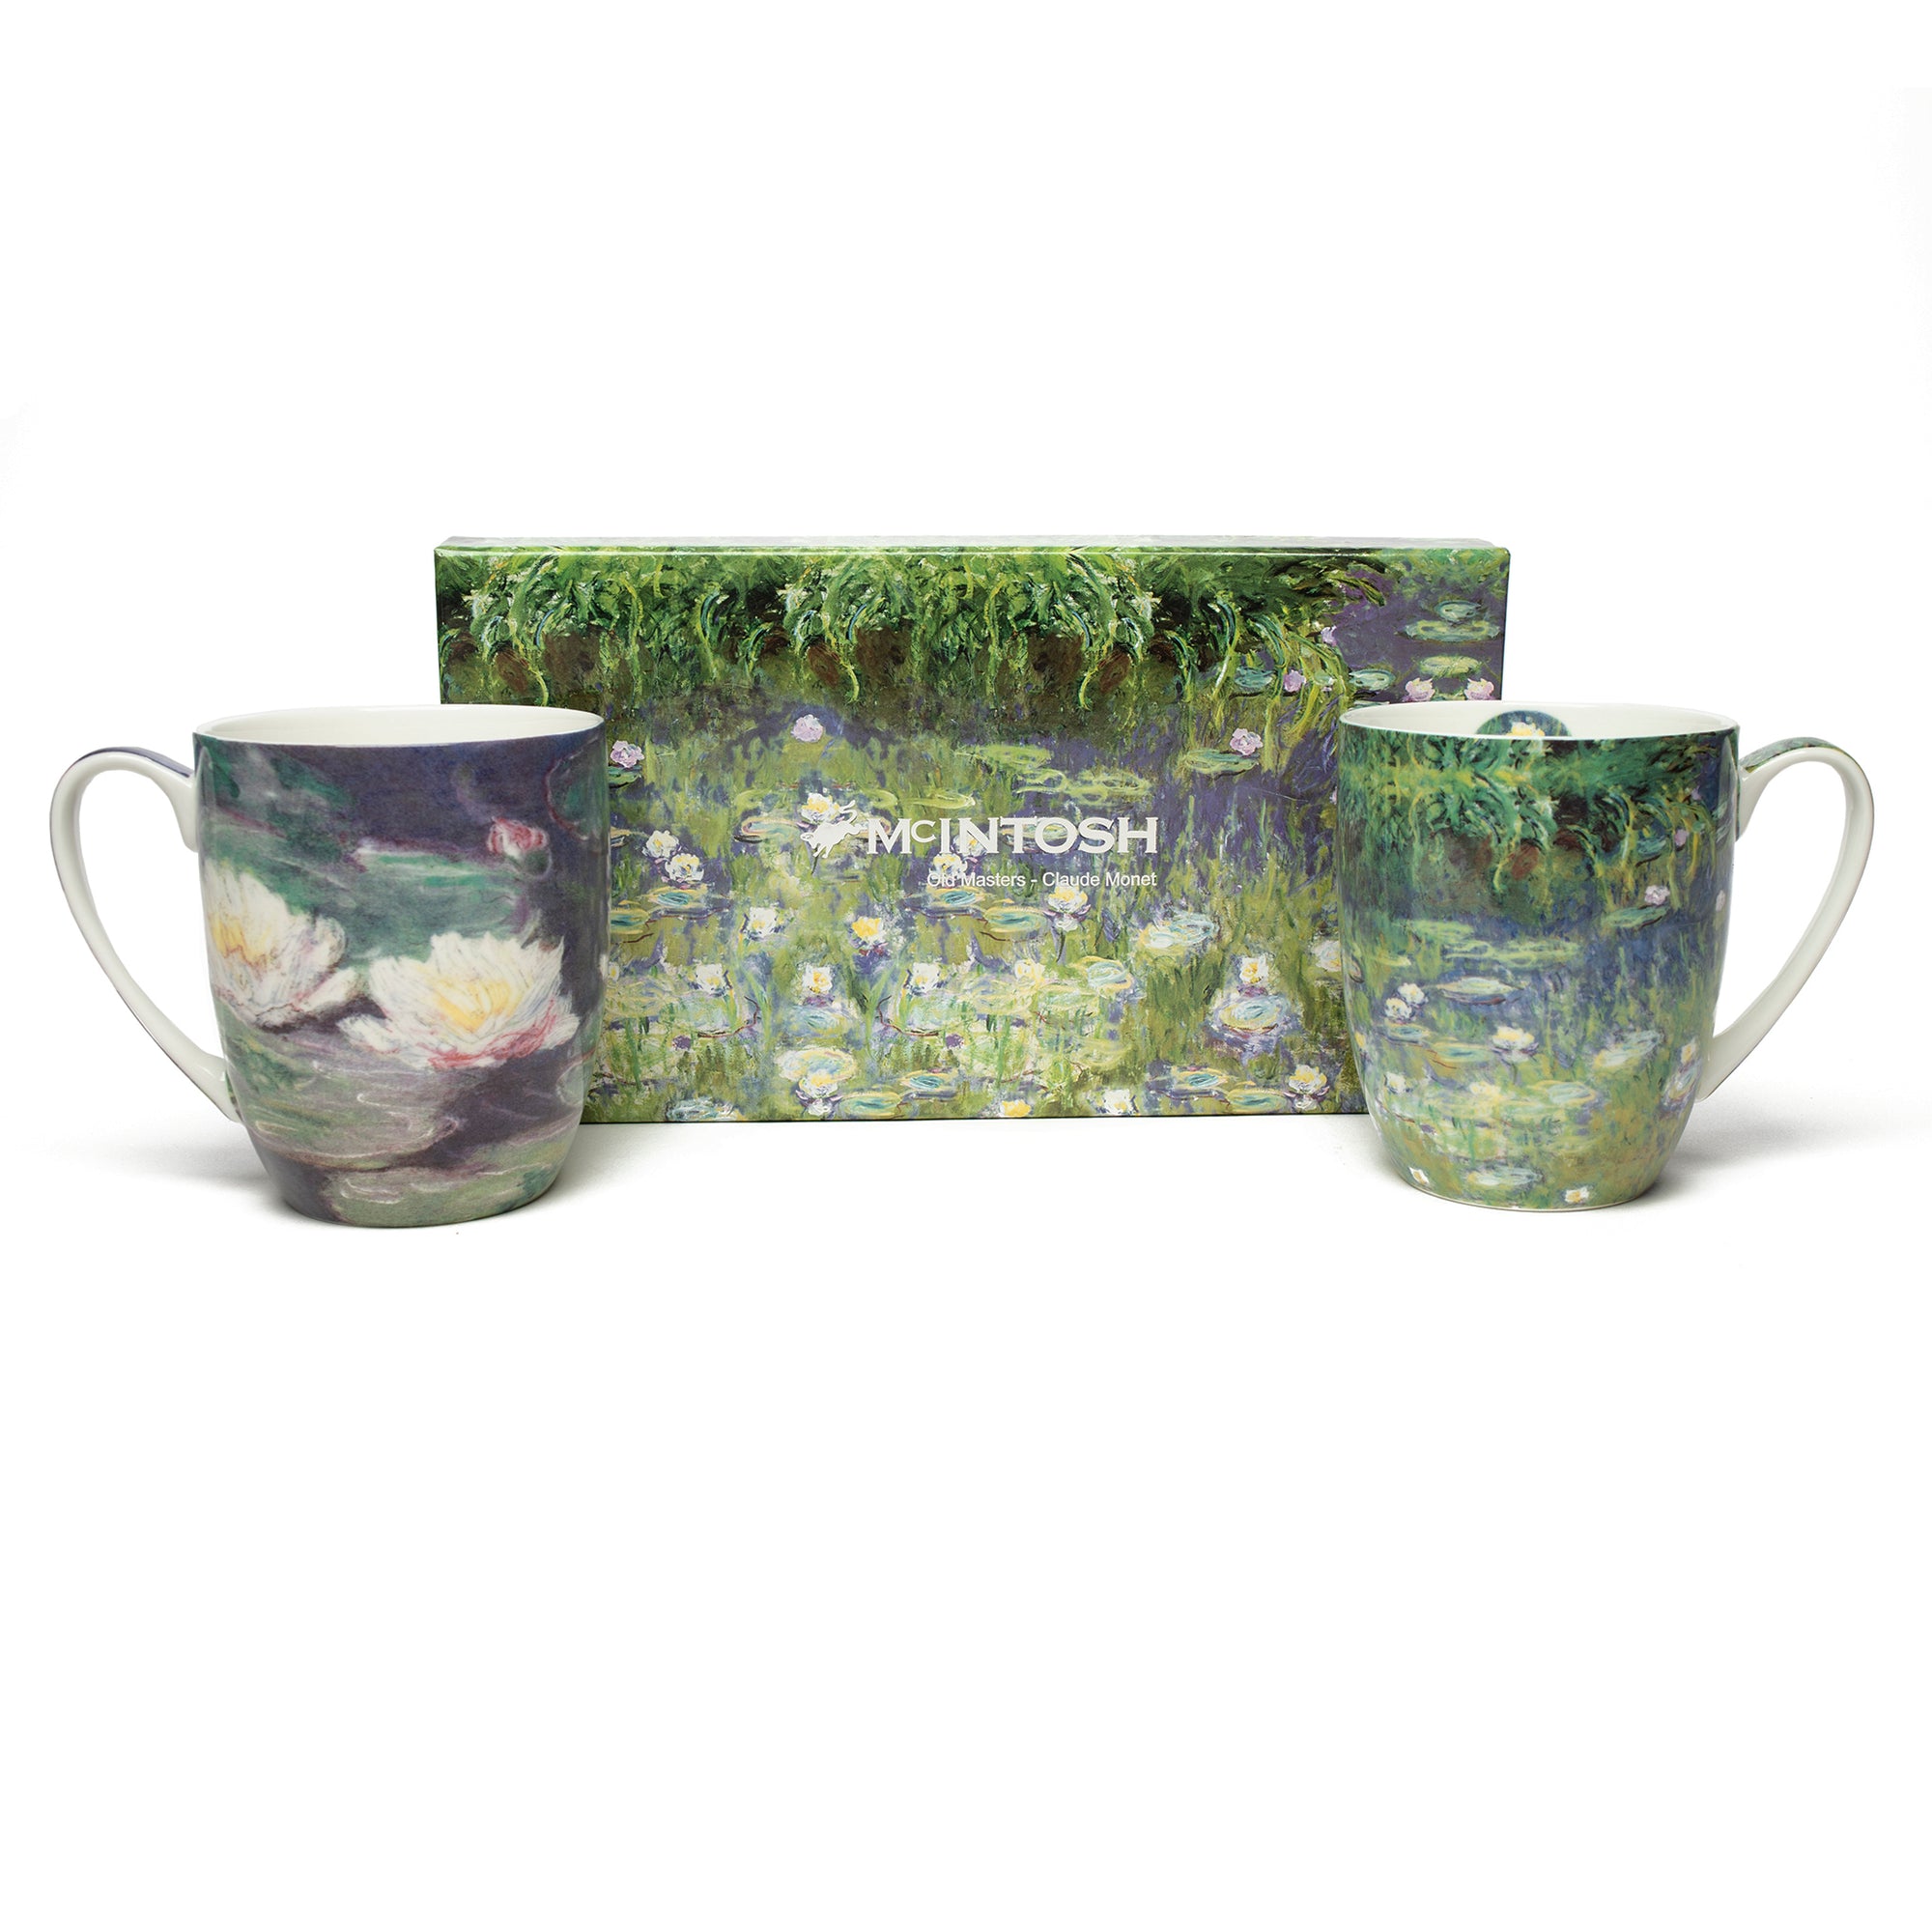 Pair of Fine Bone China Mugs featuring Monet's Water Lilies | Getty Store